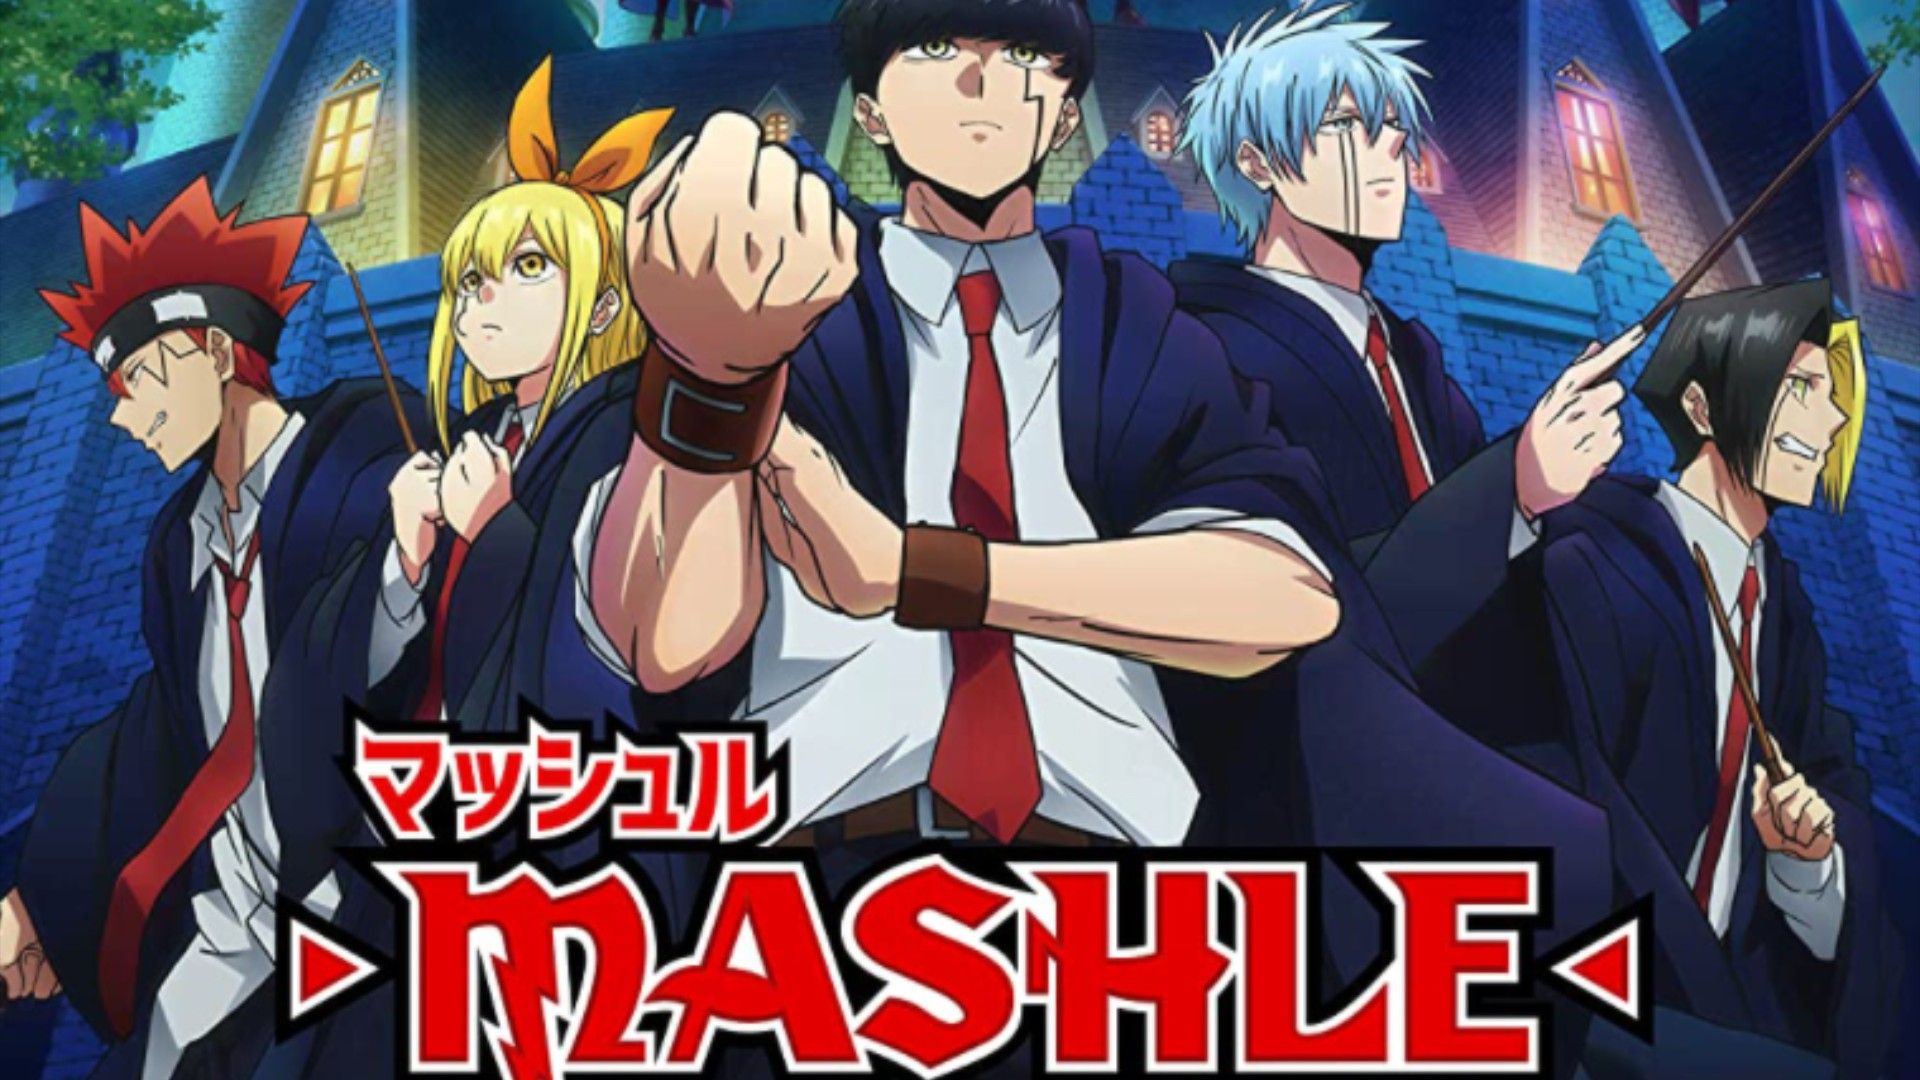 Mashle Episode 11 Release Date, Time, Where to Watch Online